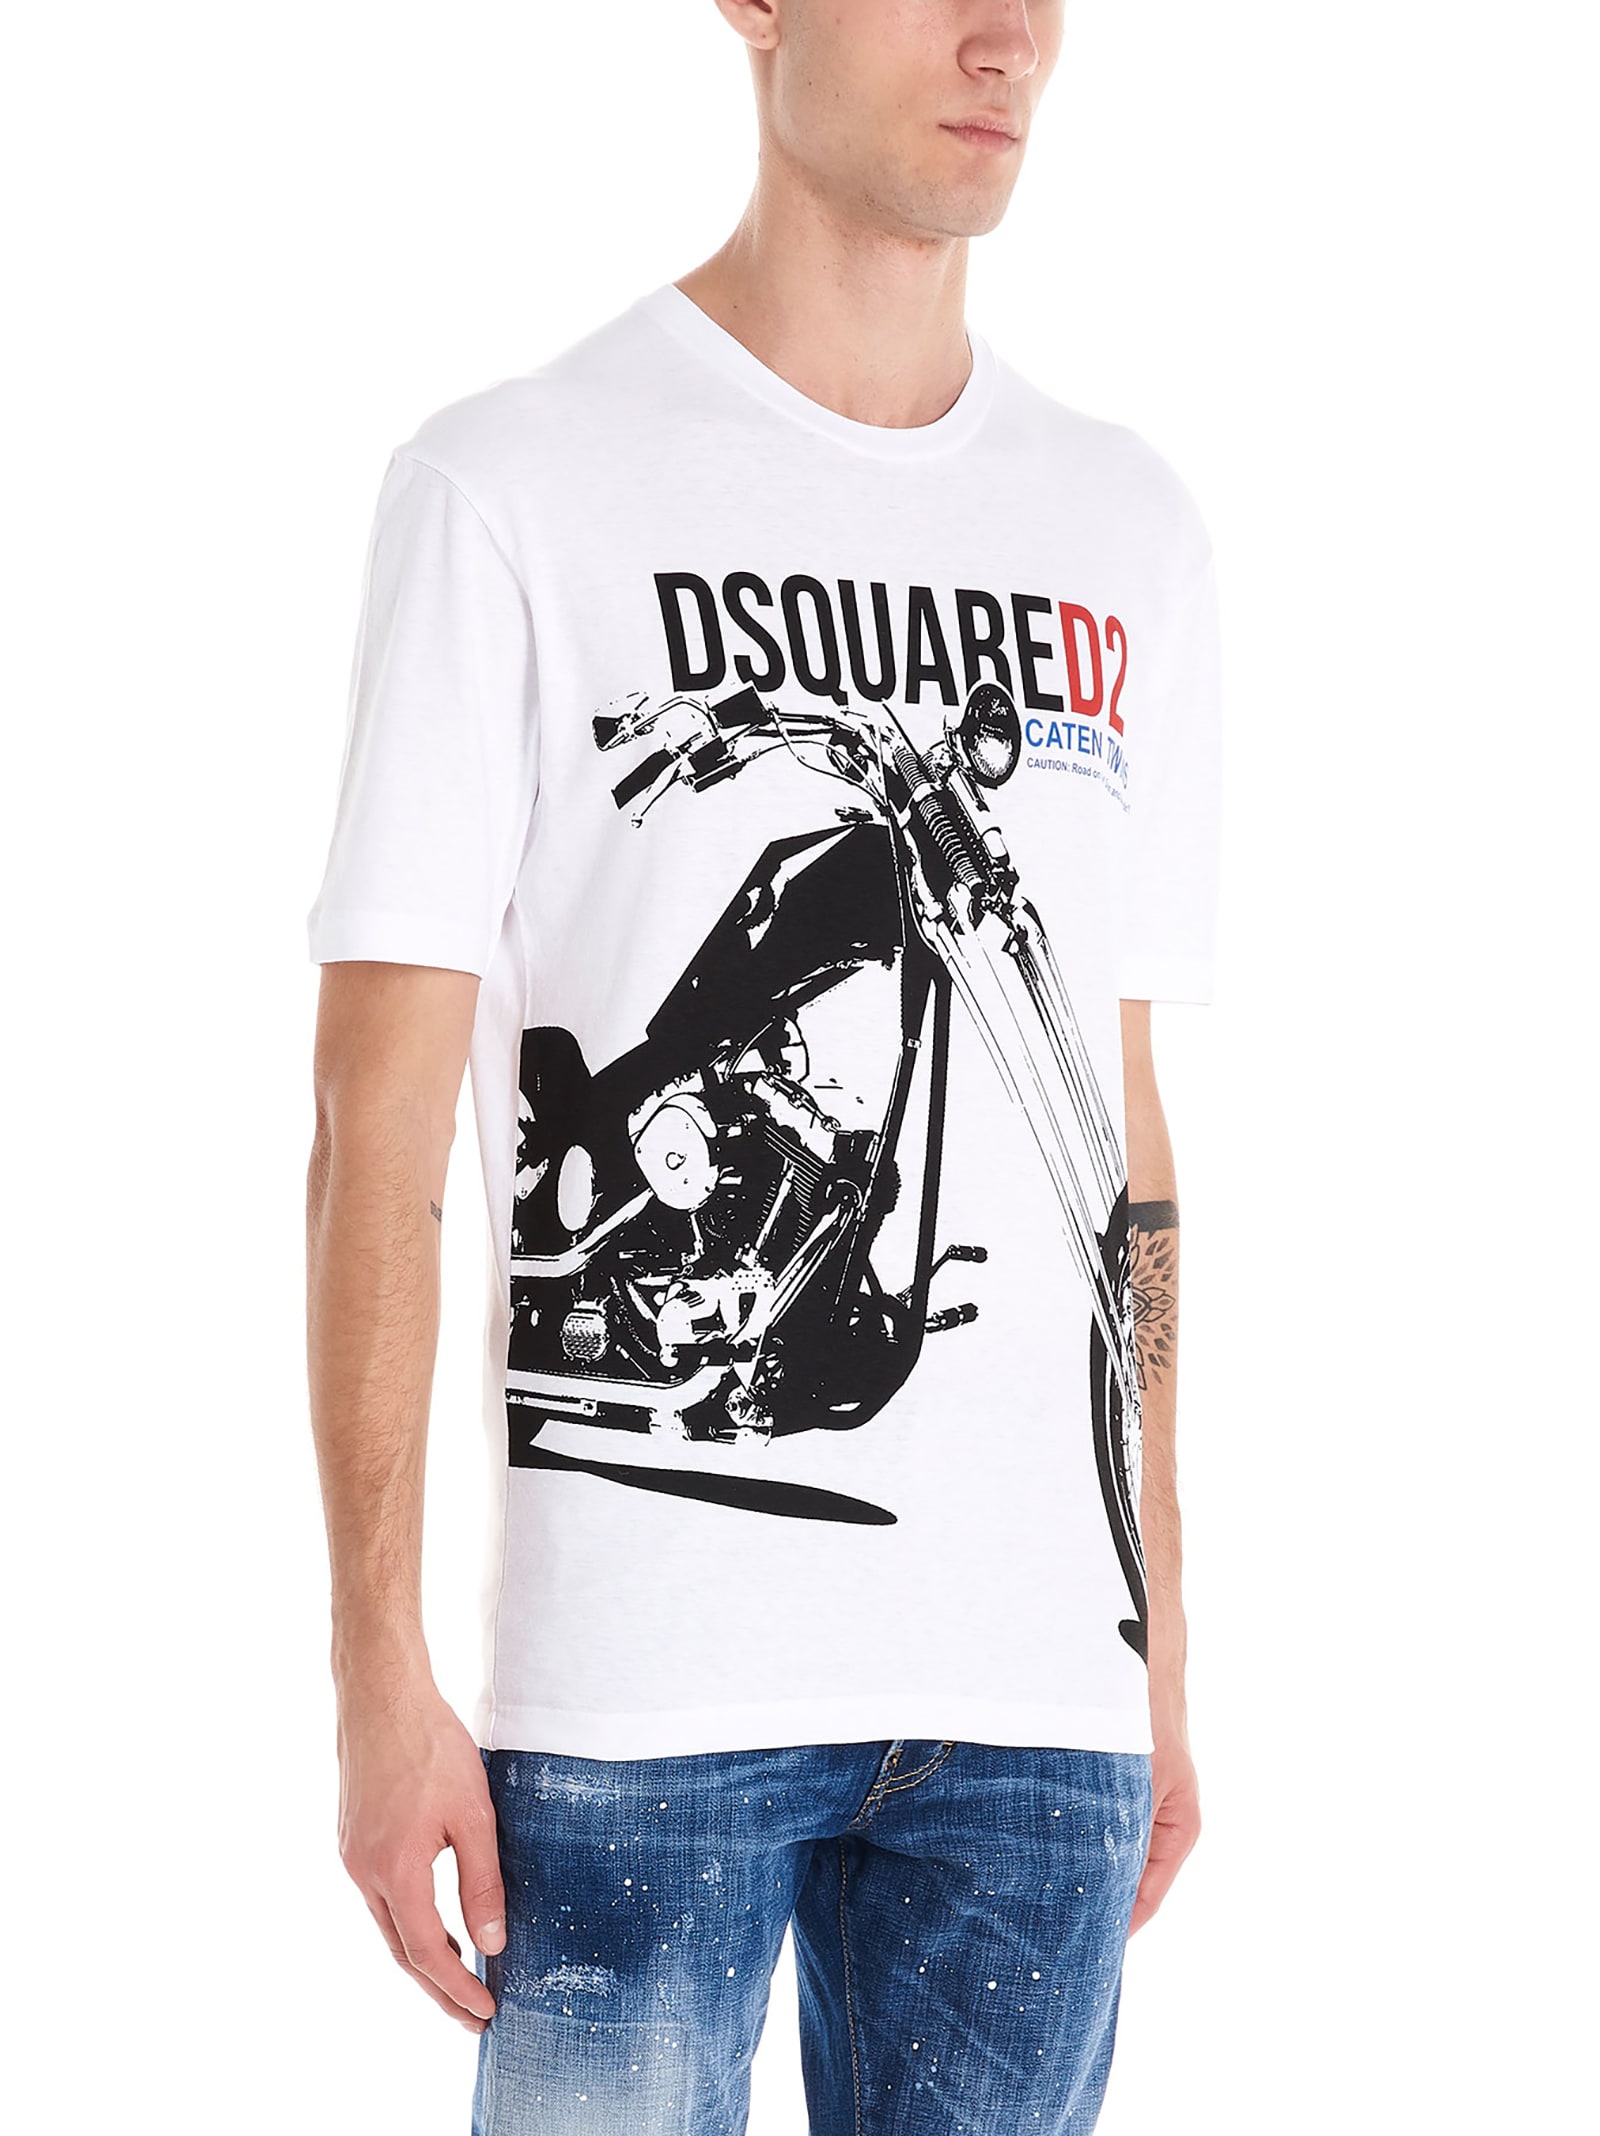 Dsquared2 Short Sleeve T Shirts Italist Always Like A Sale